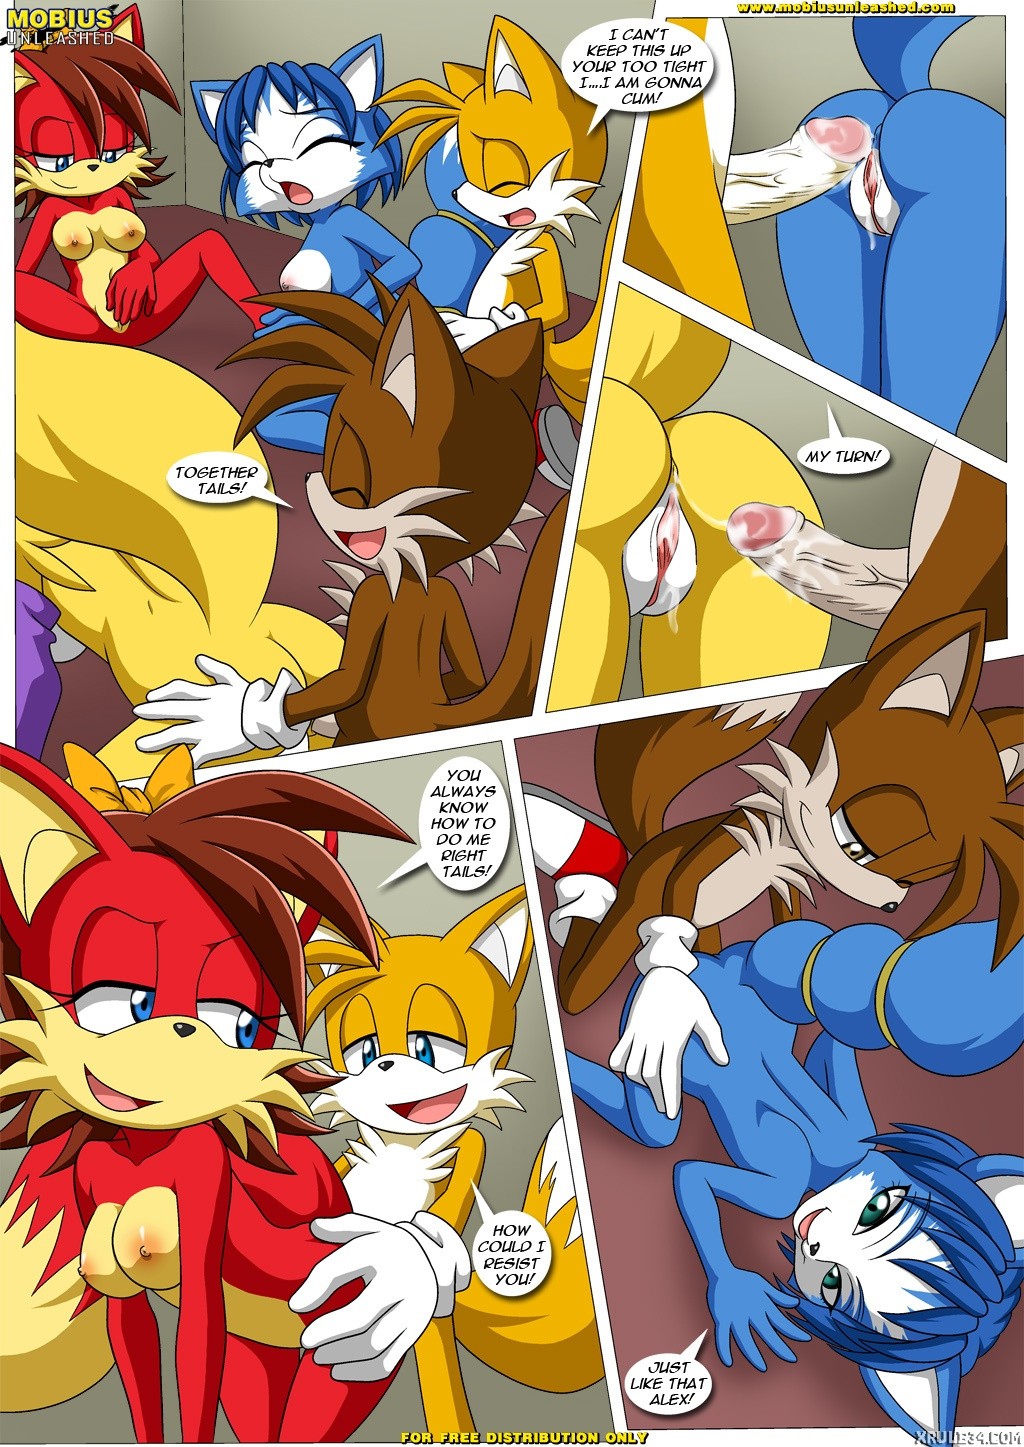 Foxxxes^2 - 2 Much Tail porn comic picture 7